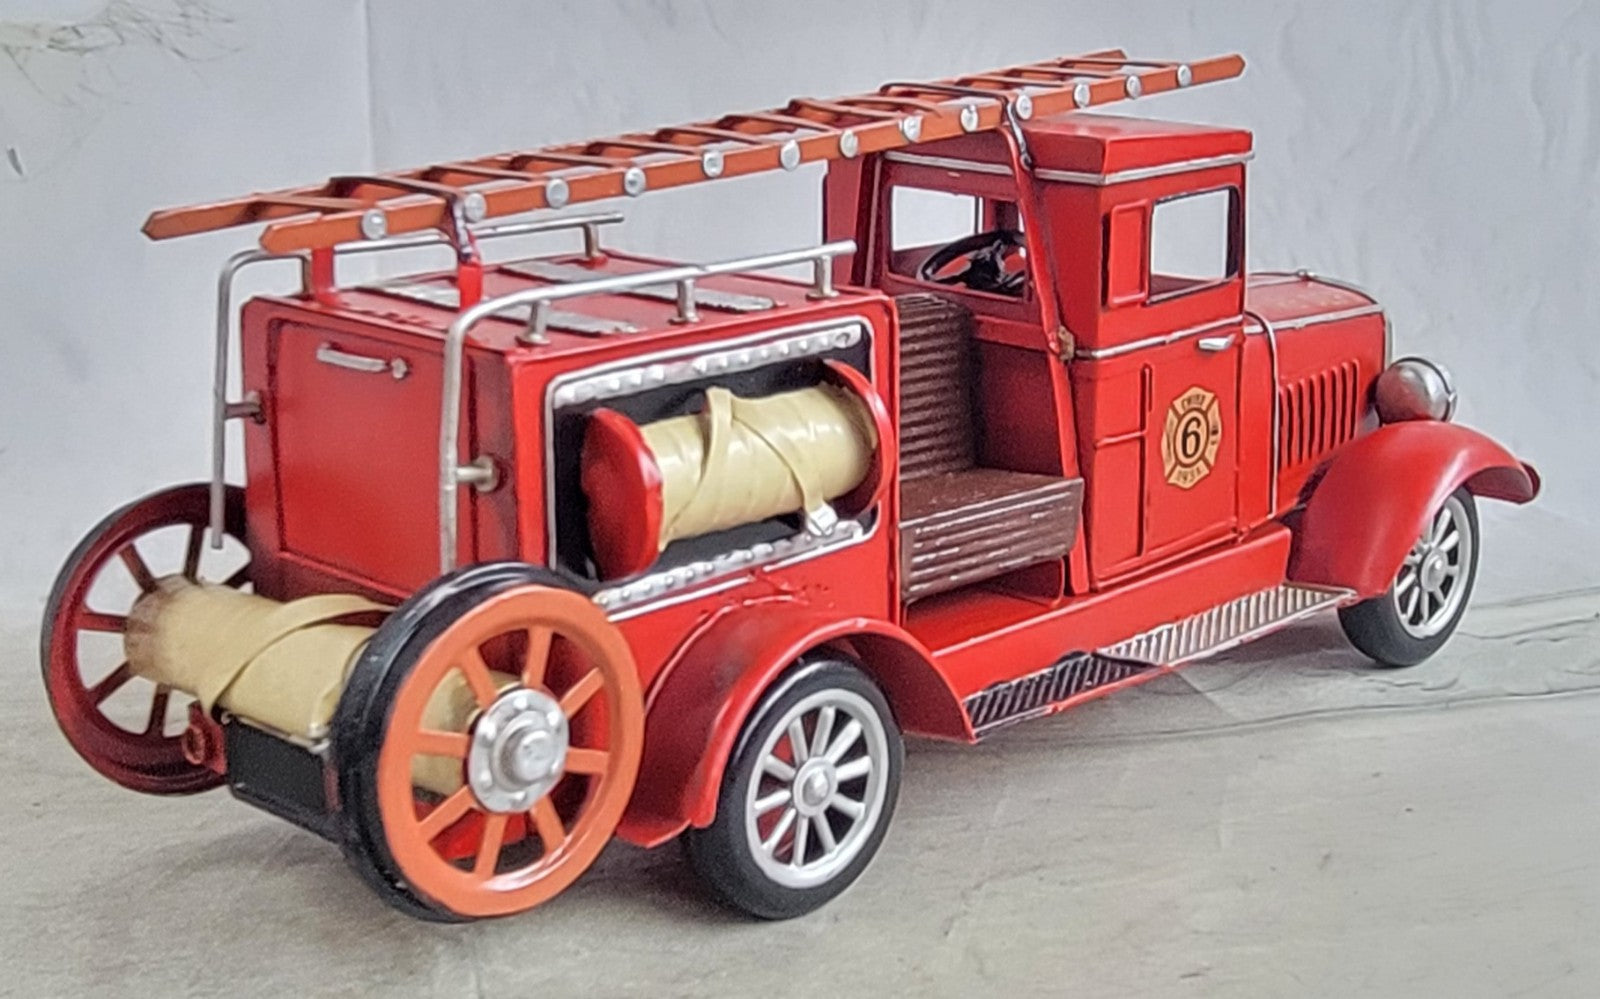 FIRE DEPARTMENT SO PRAIRIE Pumper FIRE TRUCK F.D.N.Y. HANDCRAFTED DETAILED CLASSIC ARTWORK